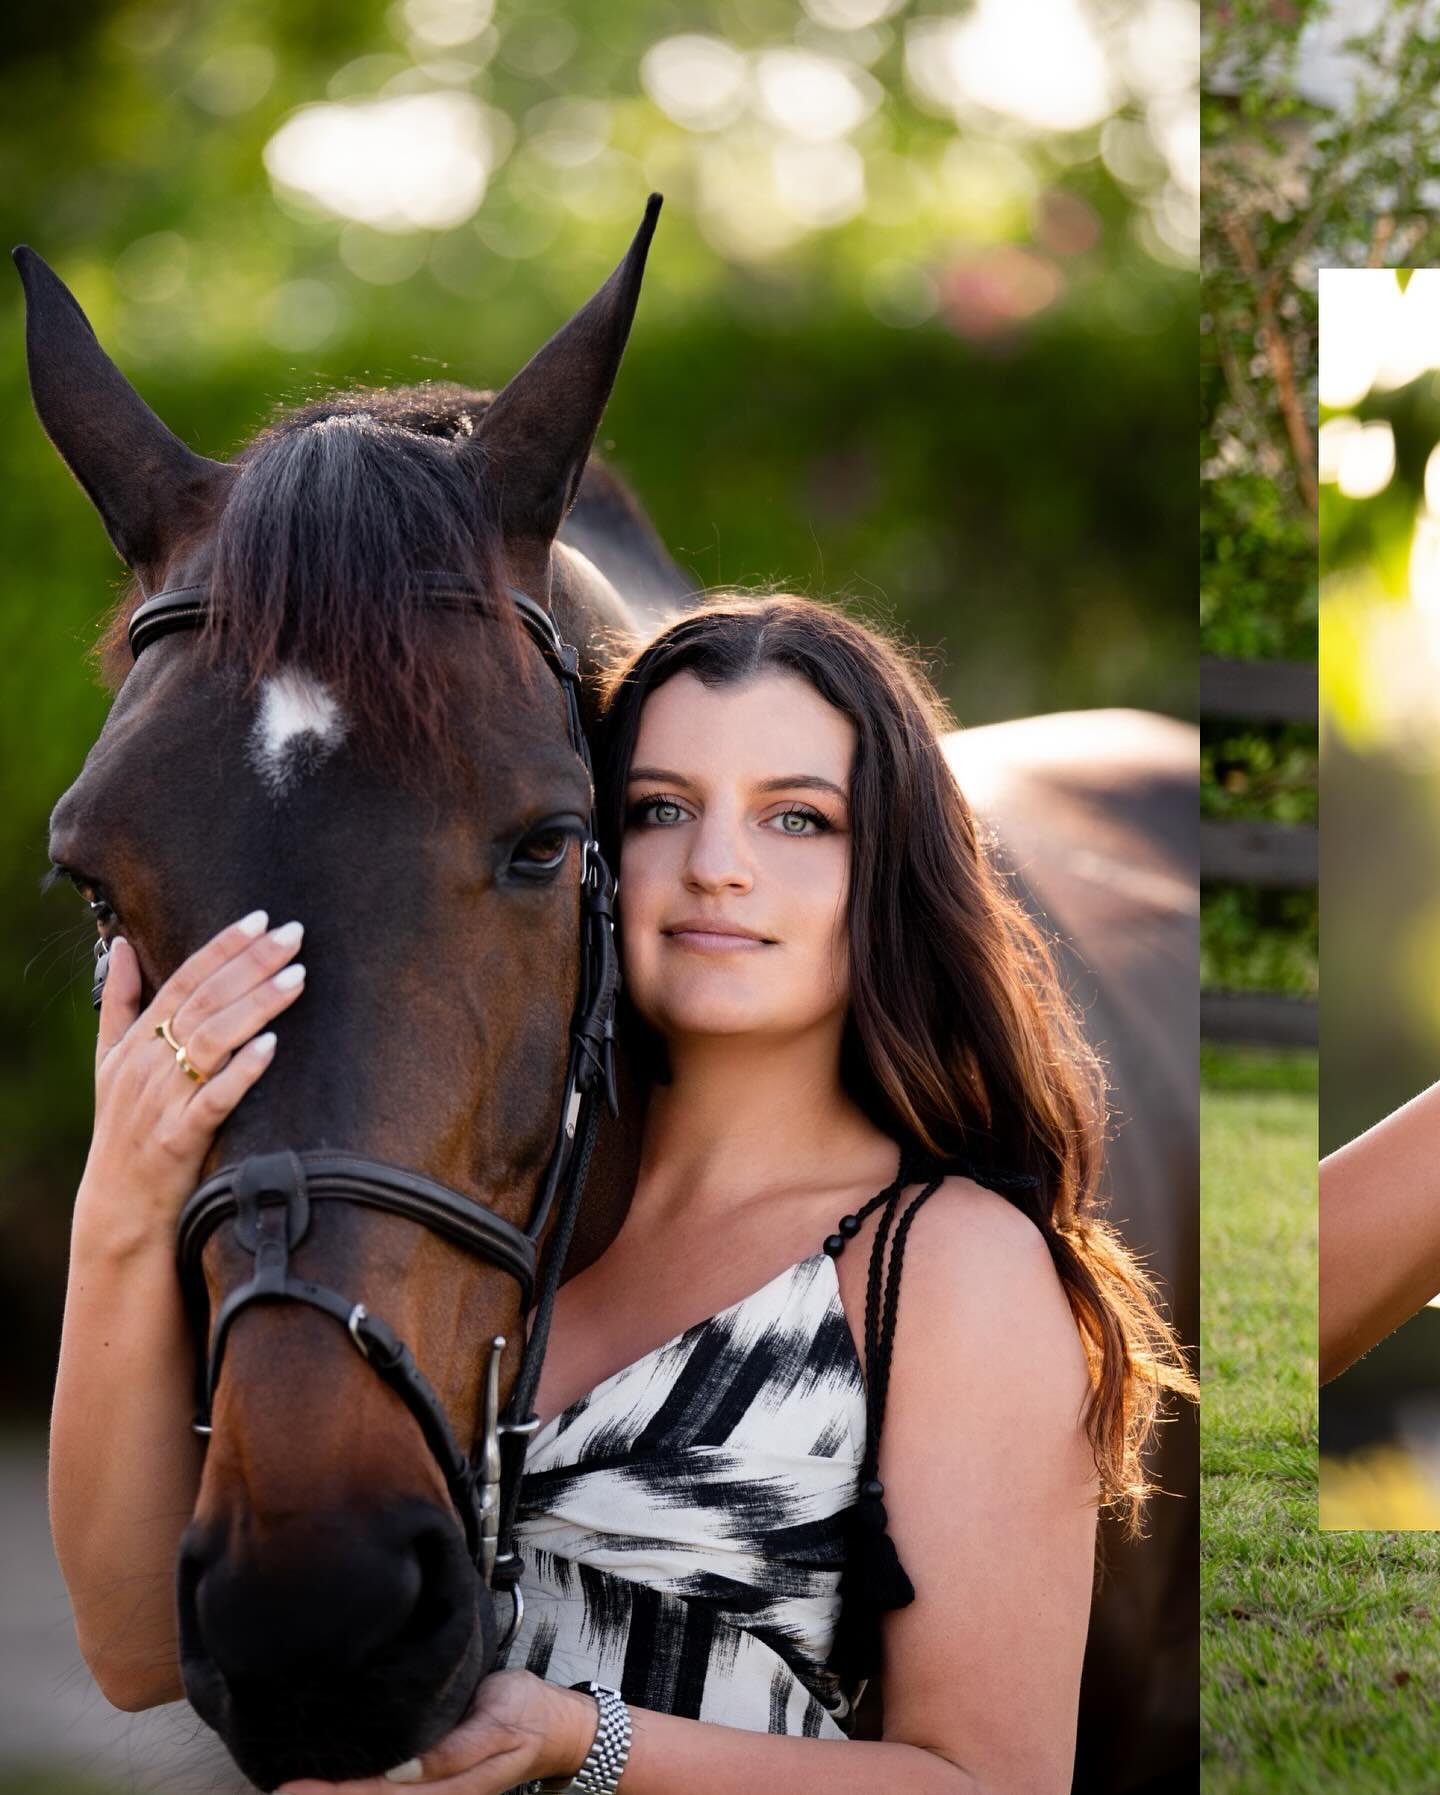 Rachel, Elana &amp; Spots ☀️
Photographed in Wellington, FL. 
&bull;&bull;
Horse and rider session available in Venice, FL. 
From Apr. 18-21 and Apr. 25-28